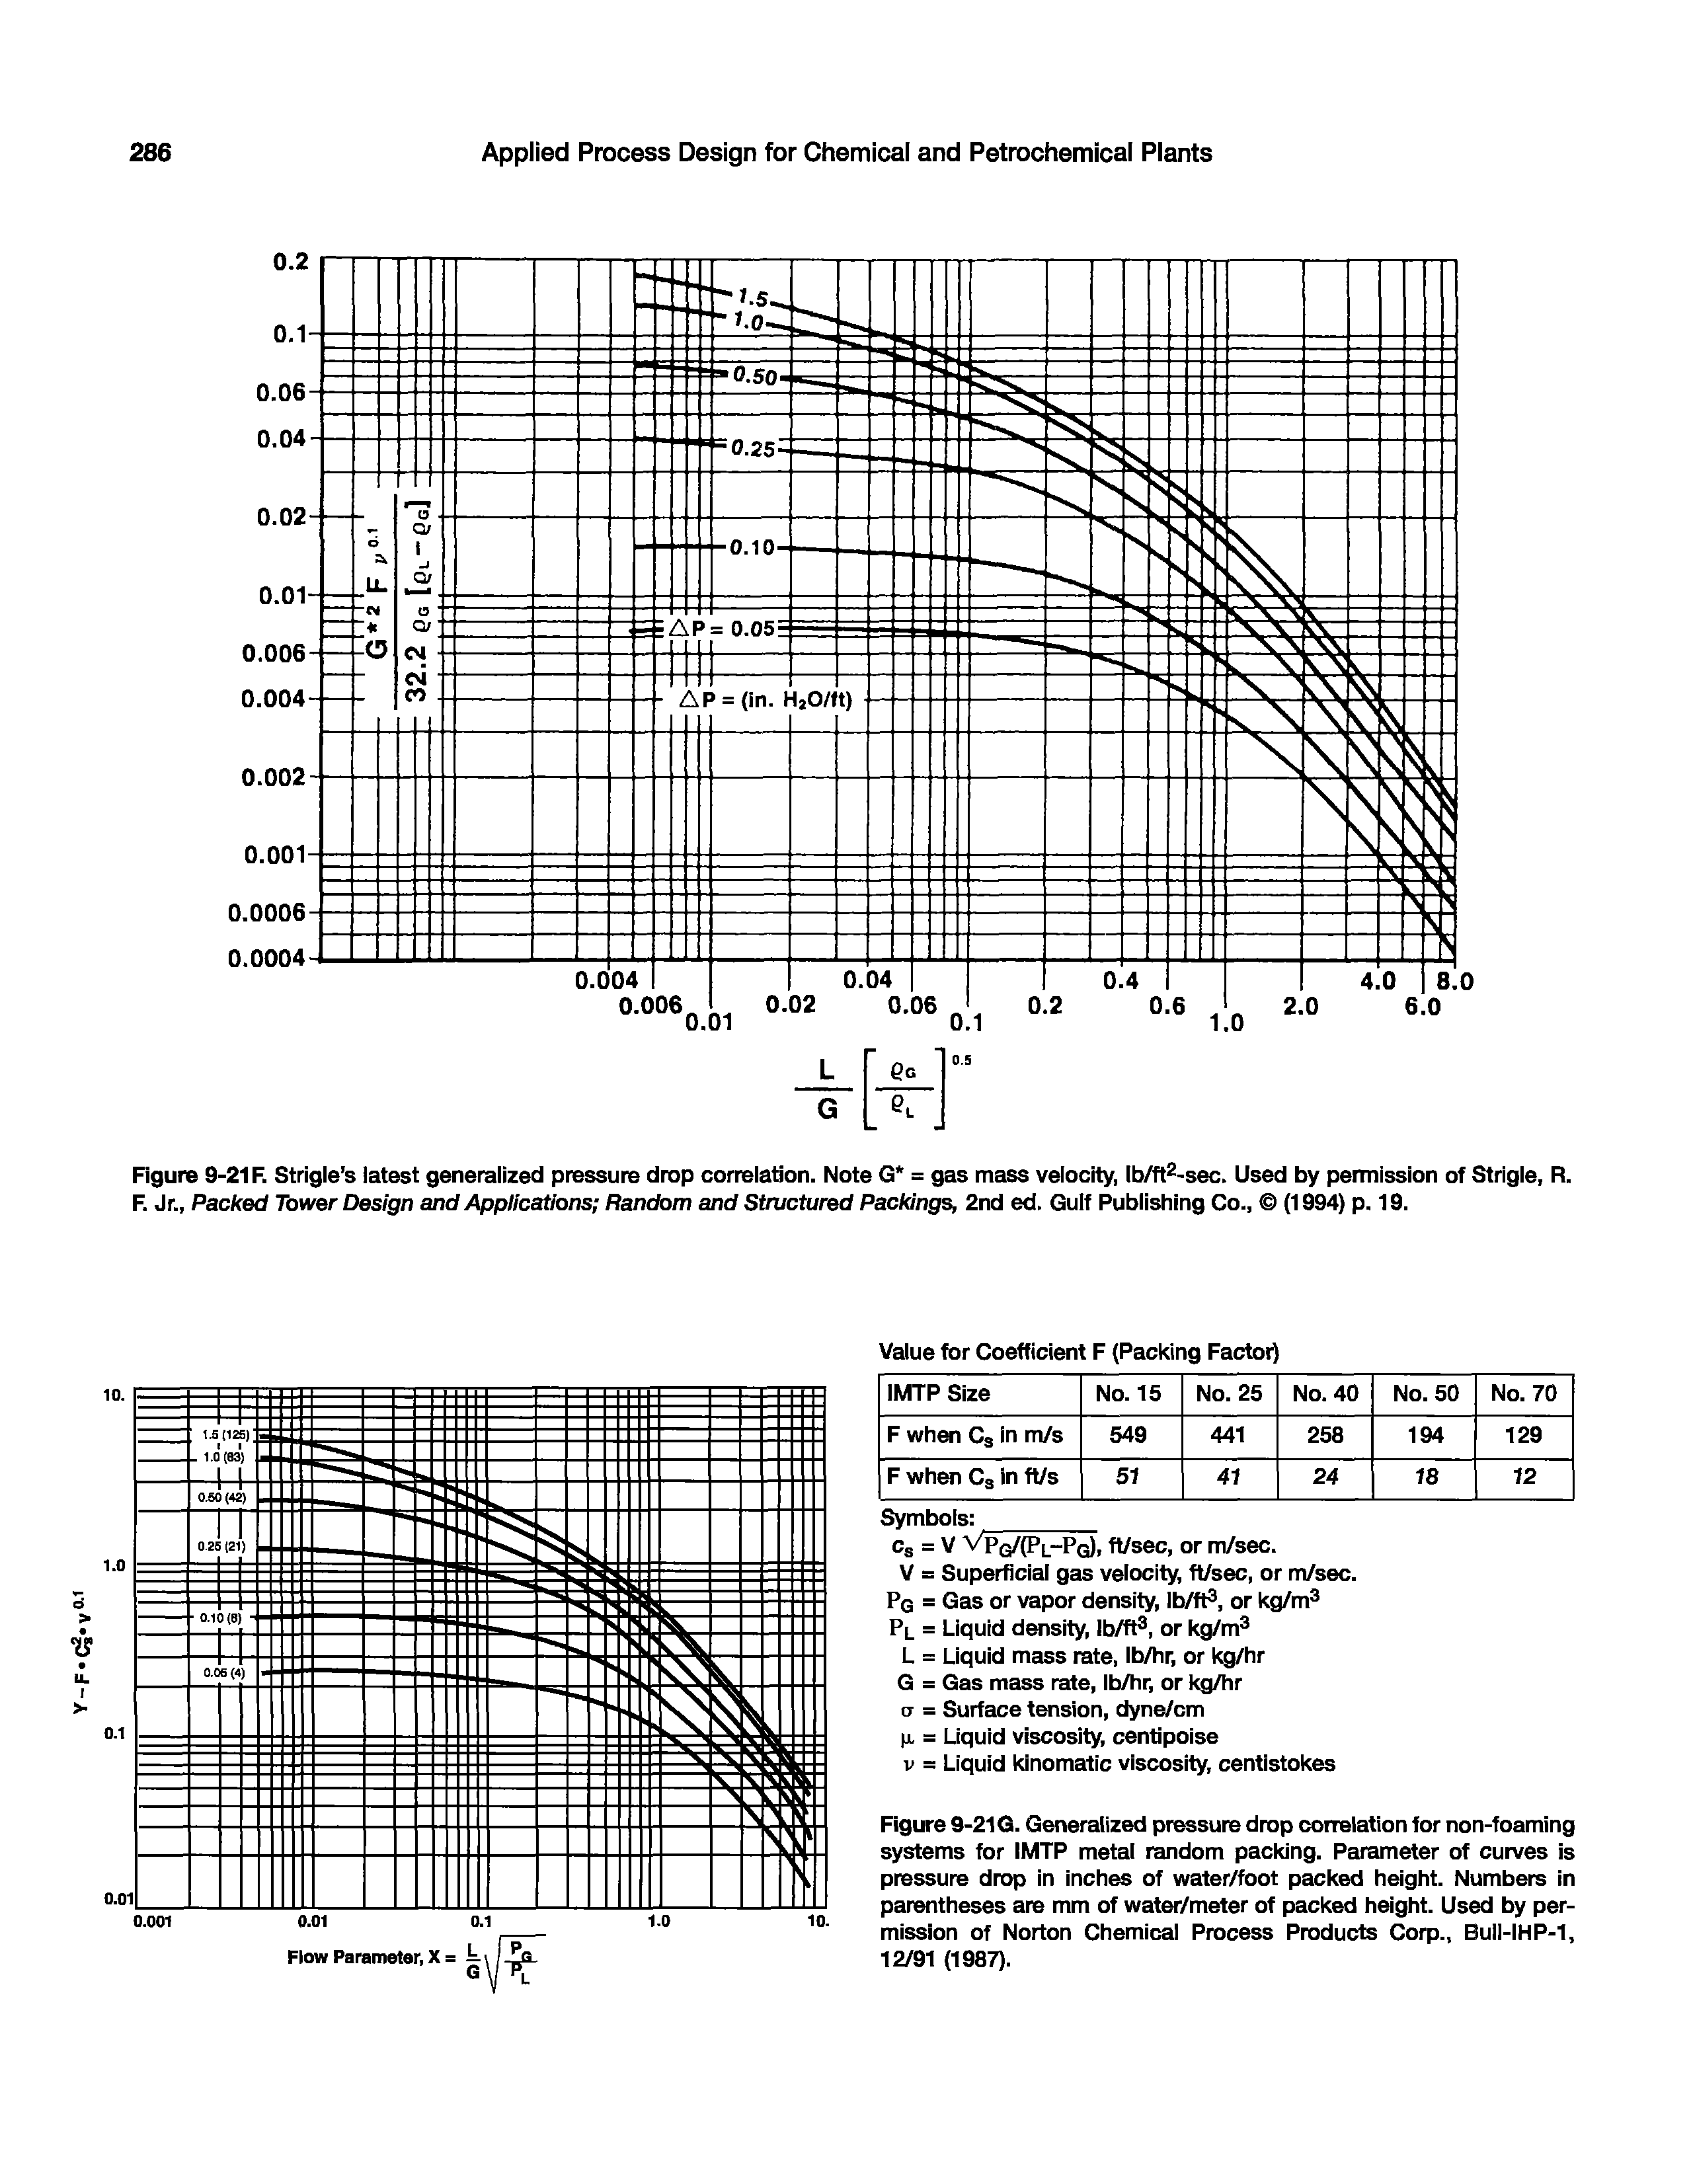 Figure 9-21F. Strigle s latest generalized pressure drop correlation. Note G = gas mass velocity, Ib/ft -sec. Used by permission of Strigle, R. F. Jr., Packed Tower Design and Applications Random and Structured Packings, 2nd ed. Gulf Publishing Co., (1994) p. 19.